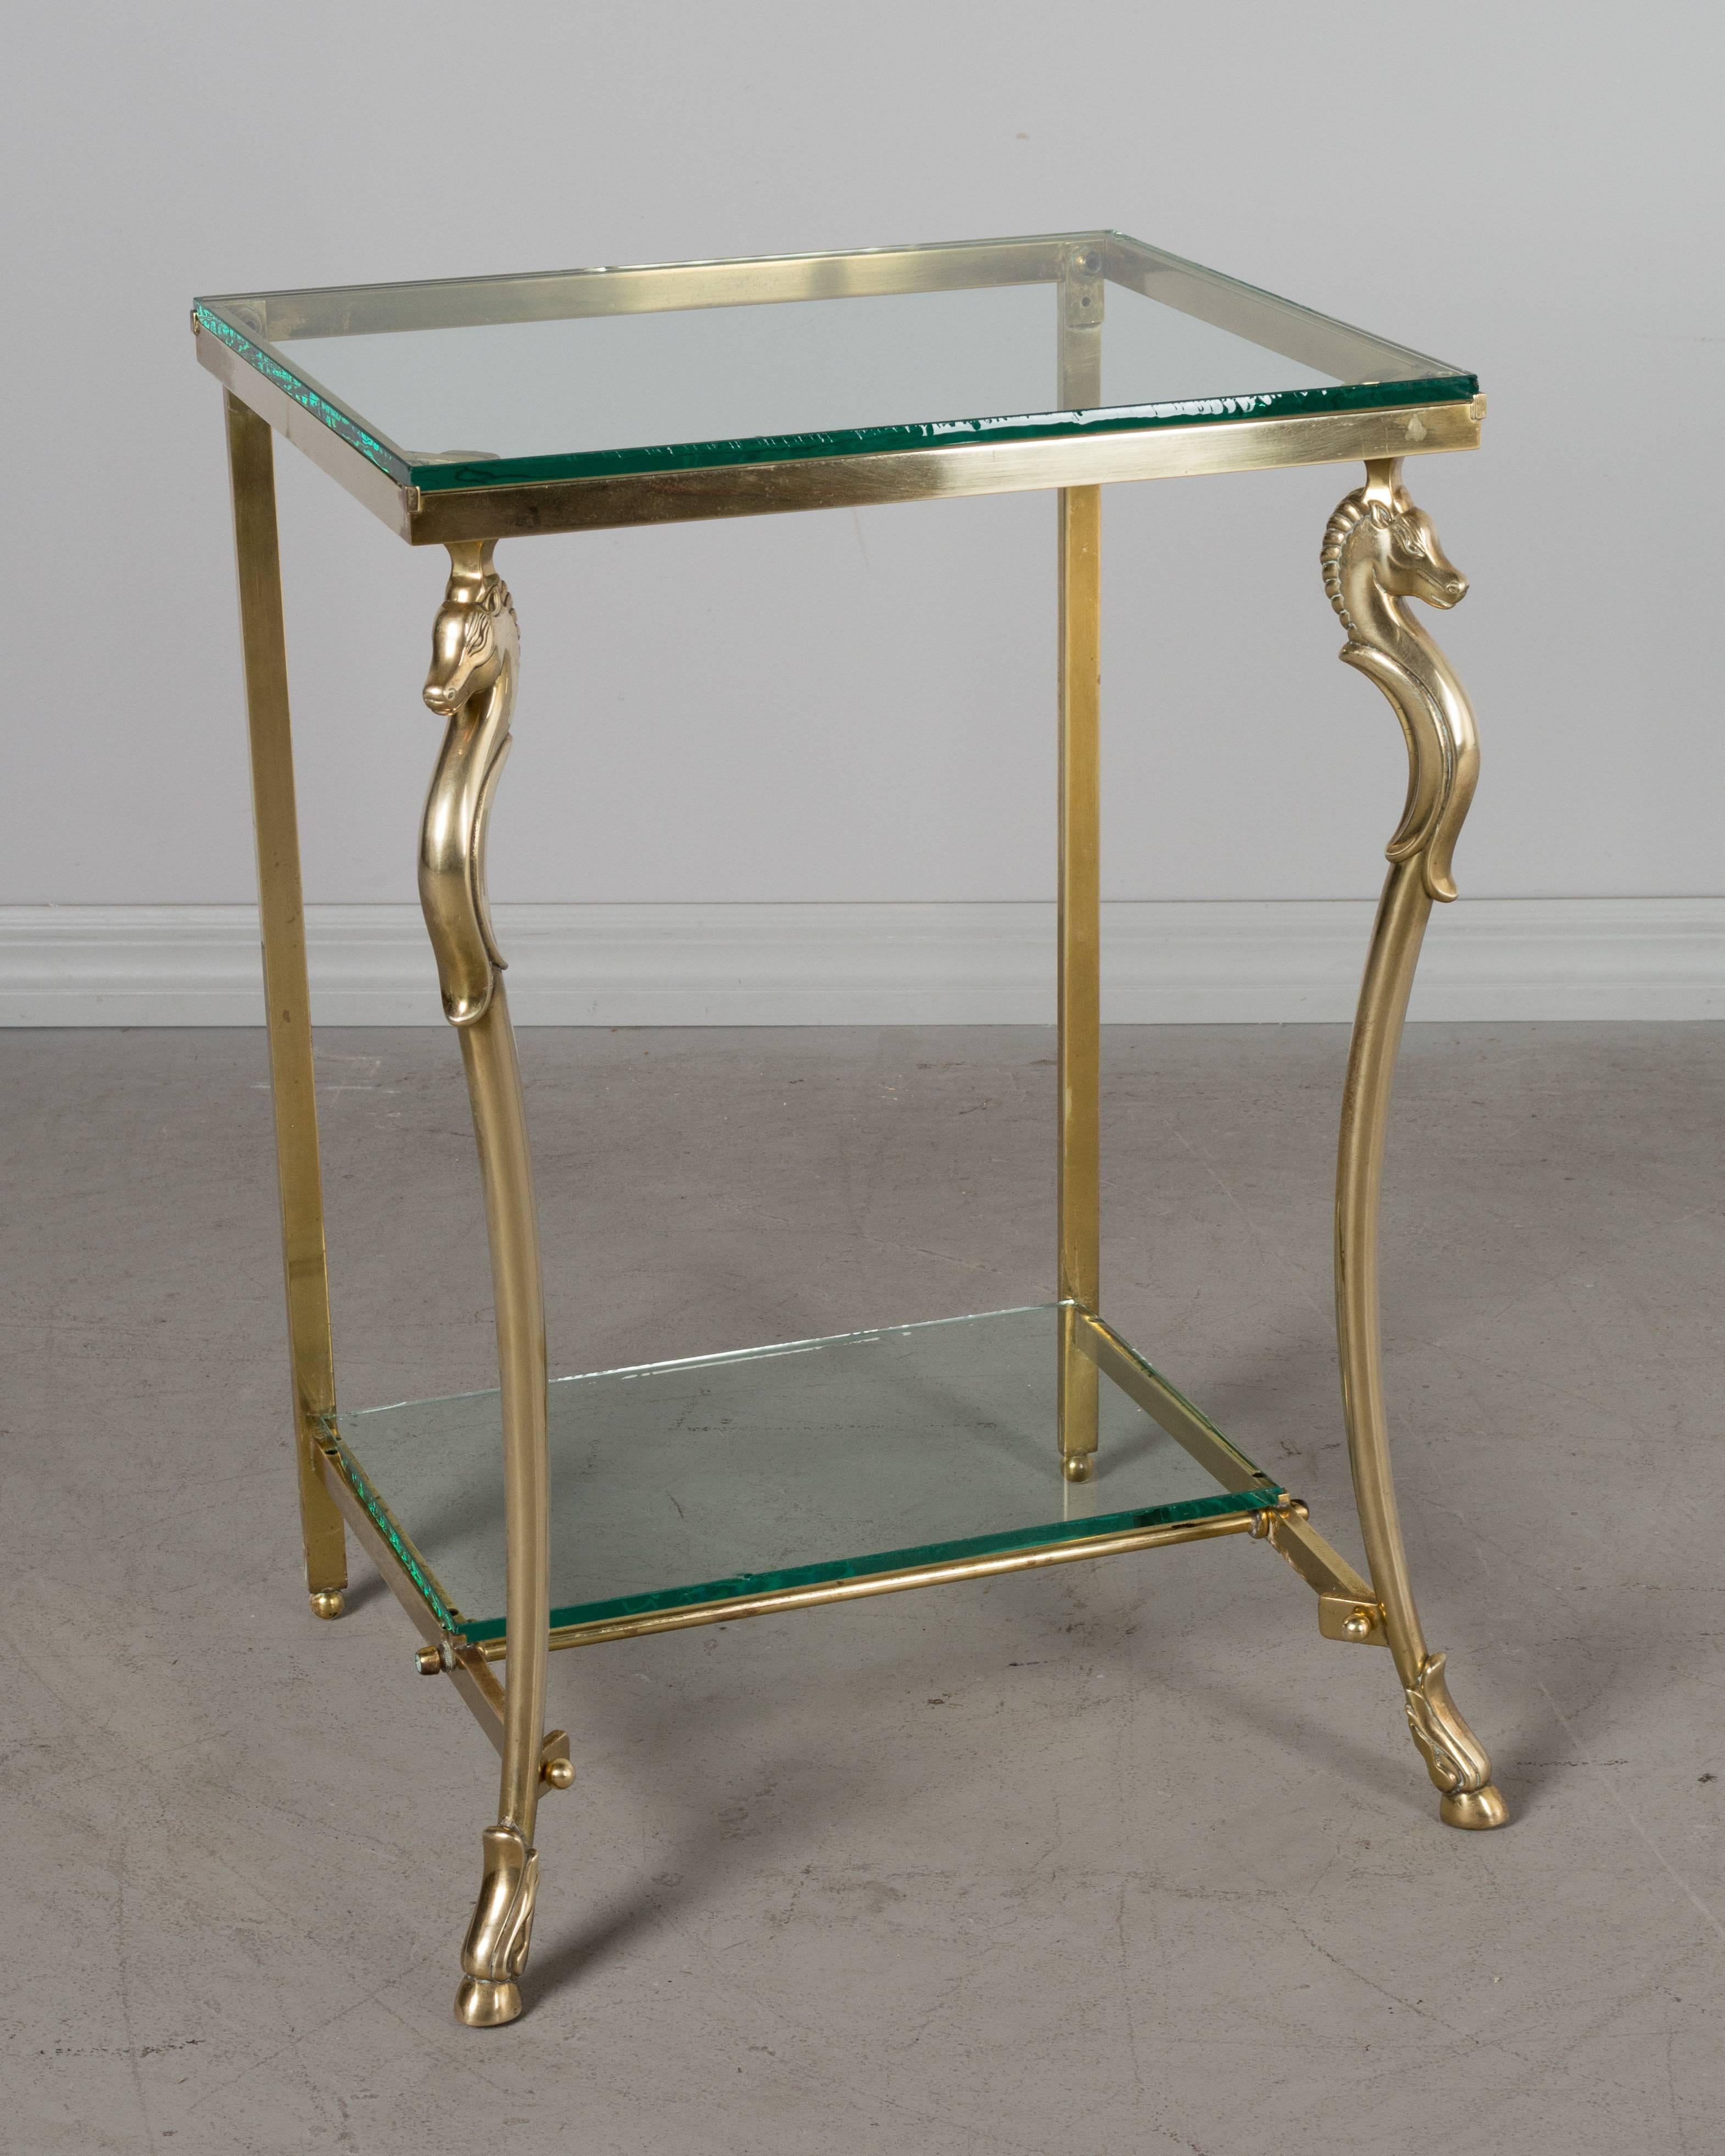 Pair of French Maison Jansen brass, horse motif side tables with glass tops and lower shelves. The brass is in excellent condition and has been polished but not lacquered. There are small chips to the corners an all four pieces of glass. There is